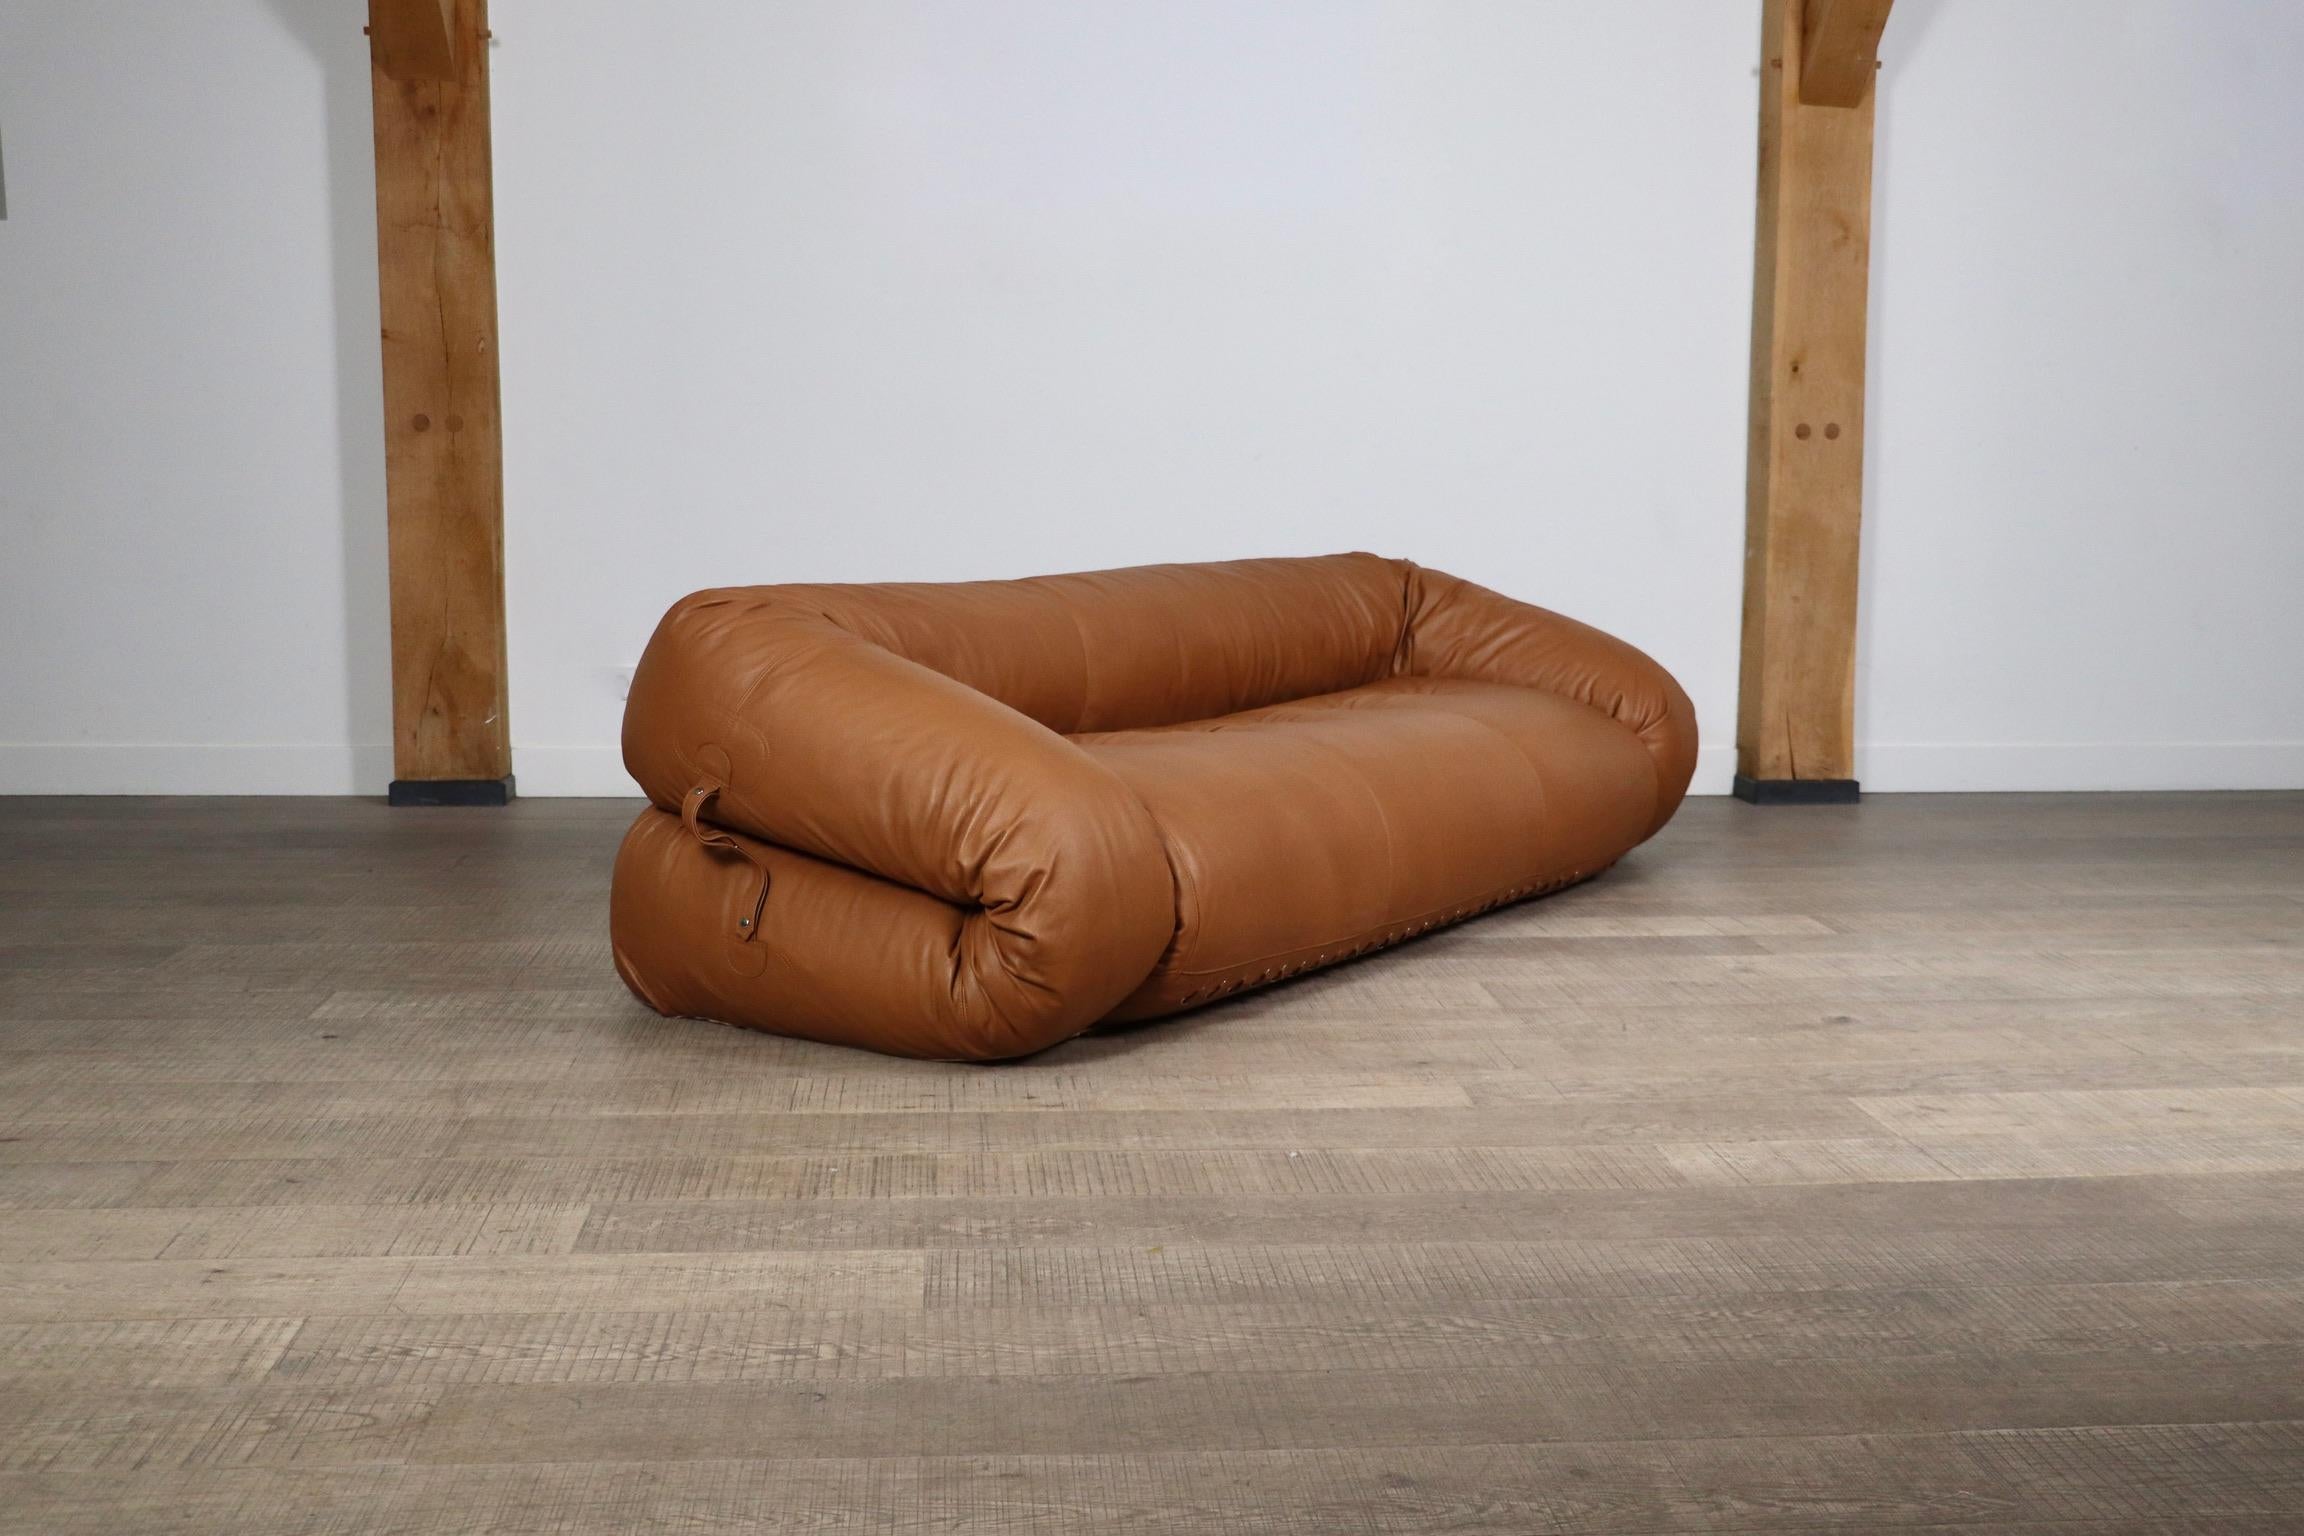 Incredible Anfibio sofa bed by Alessandro Becchi for Giovanetti Collezione Italy 1971. This stunning cognac leather upholstery fits perfectly with the white teddy fabric on the mattress inside. The sofa can easily be converted into a bed, or lounge